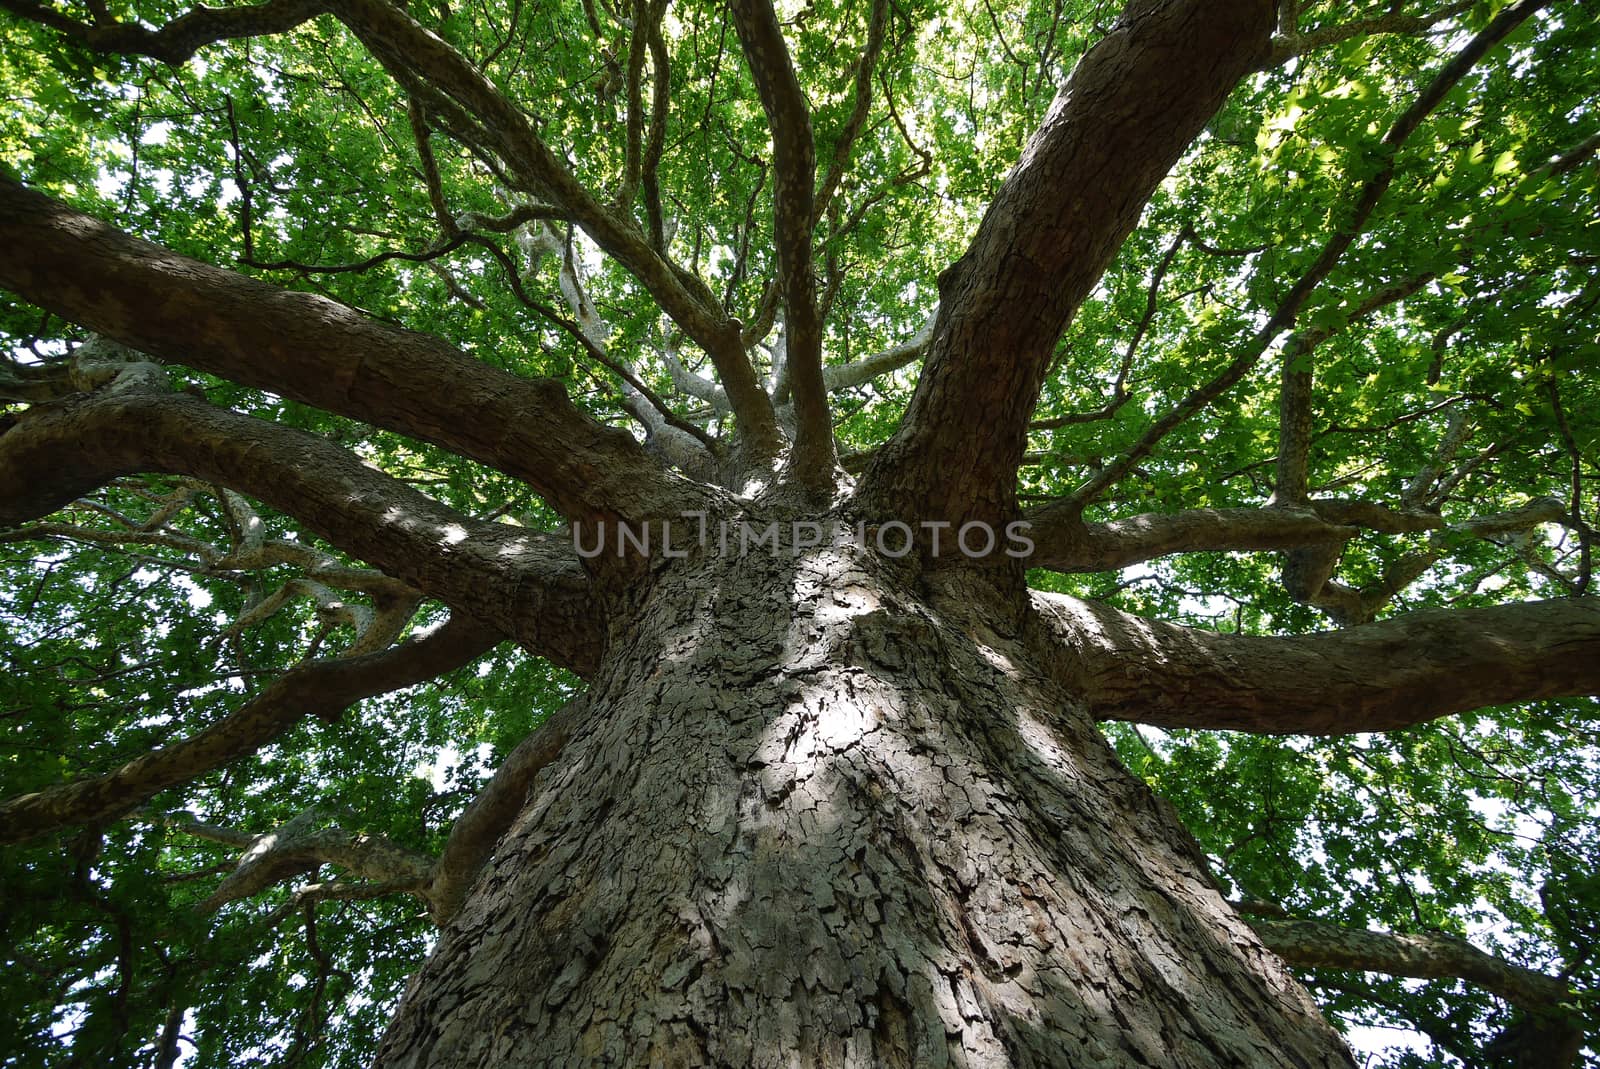 A bottom view of a thick, old tree with large thick branches with green leaves